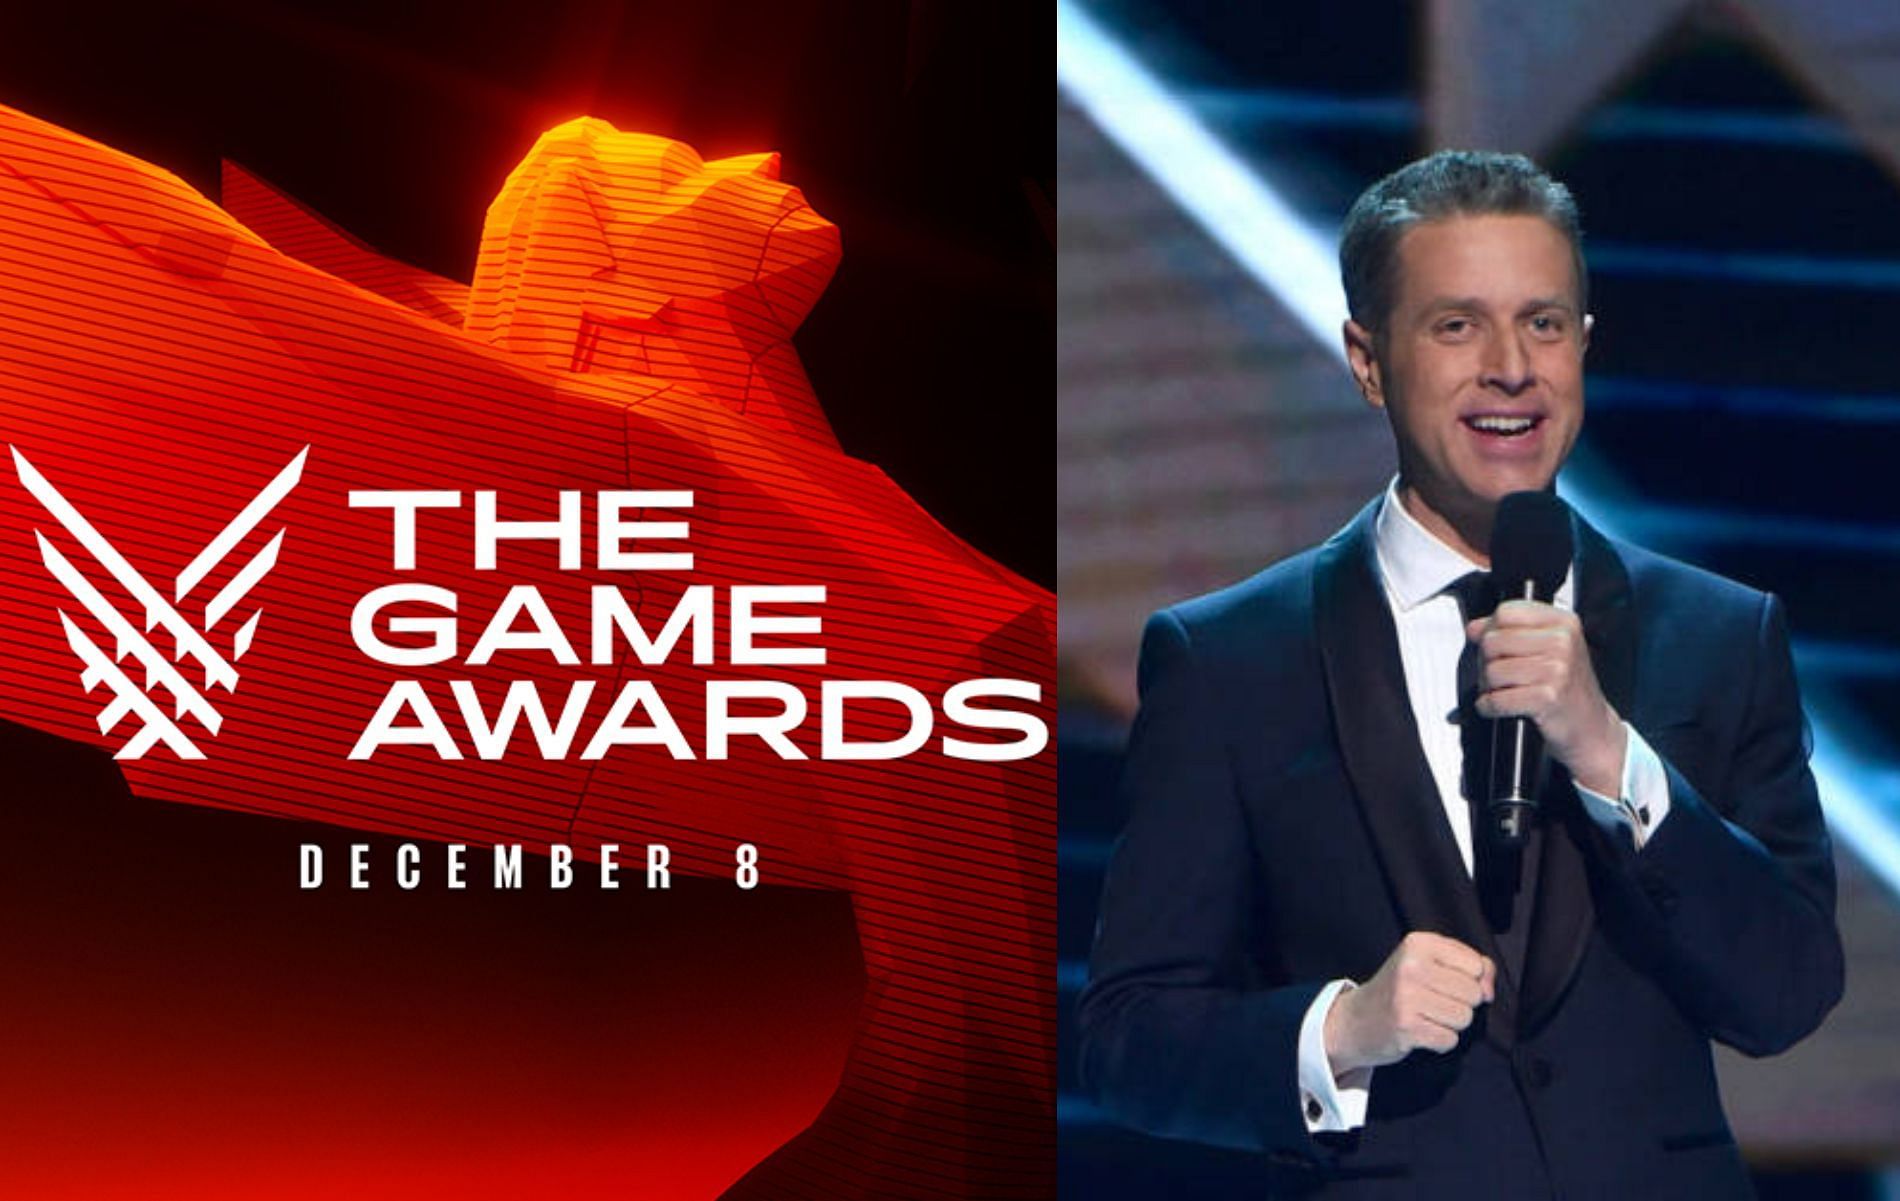 2022 Video Game Awards Season - Tracking and Discussion Thread